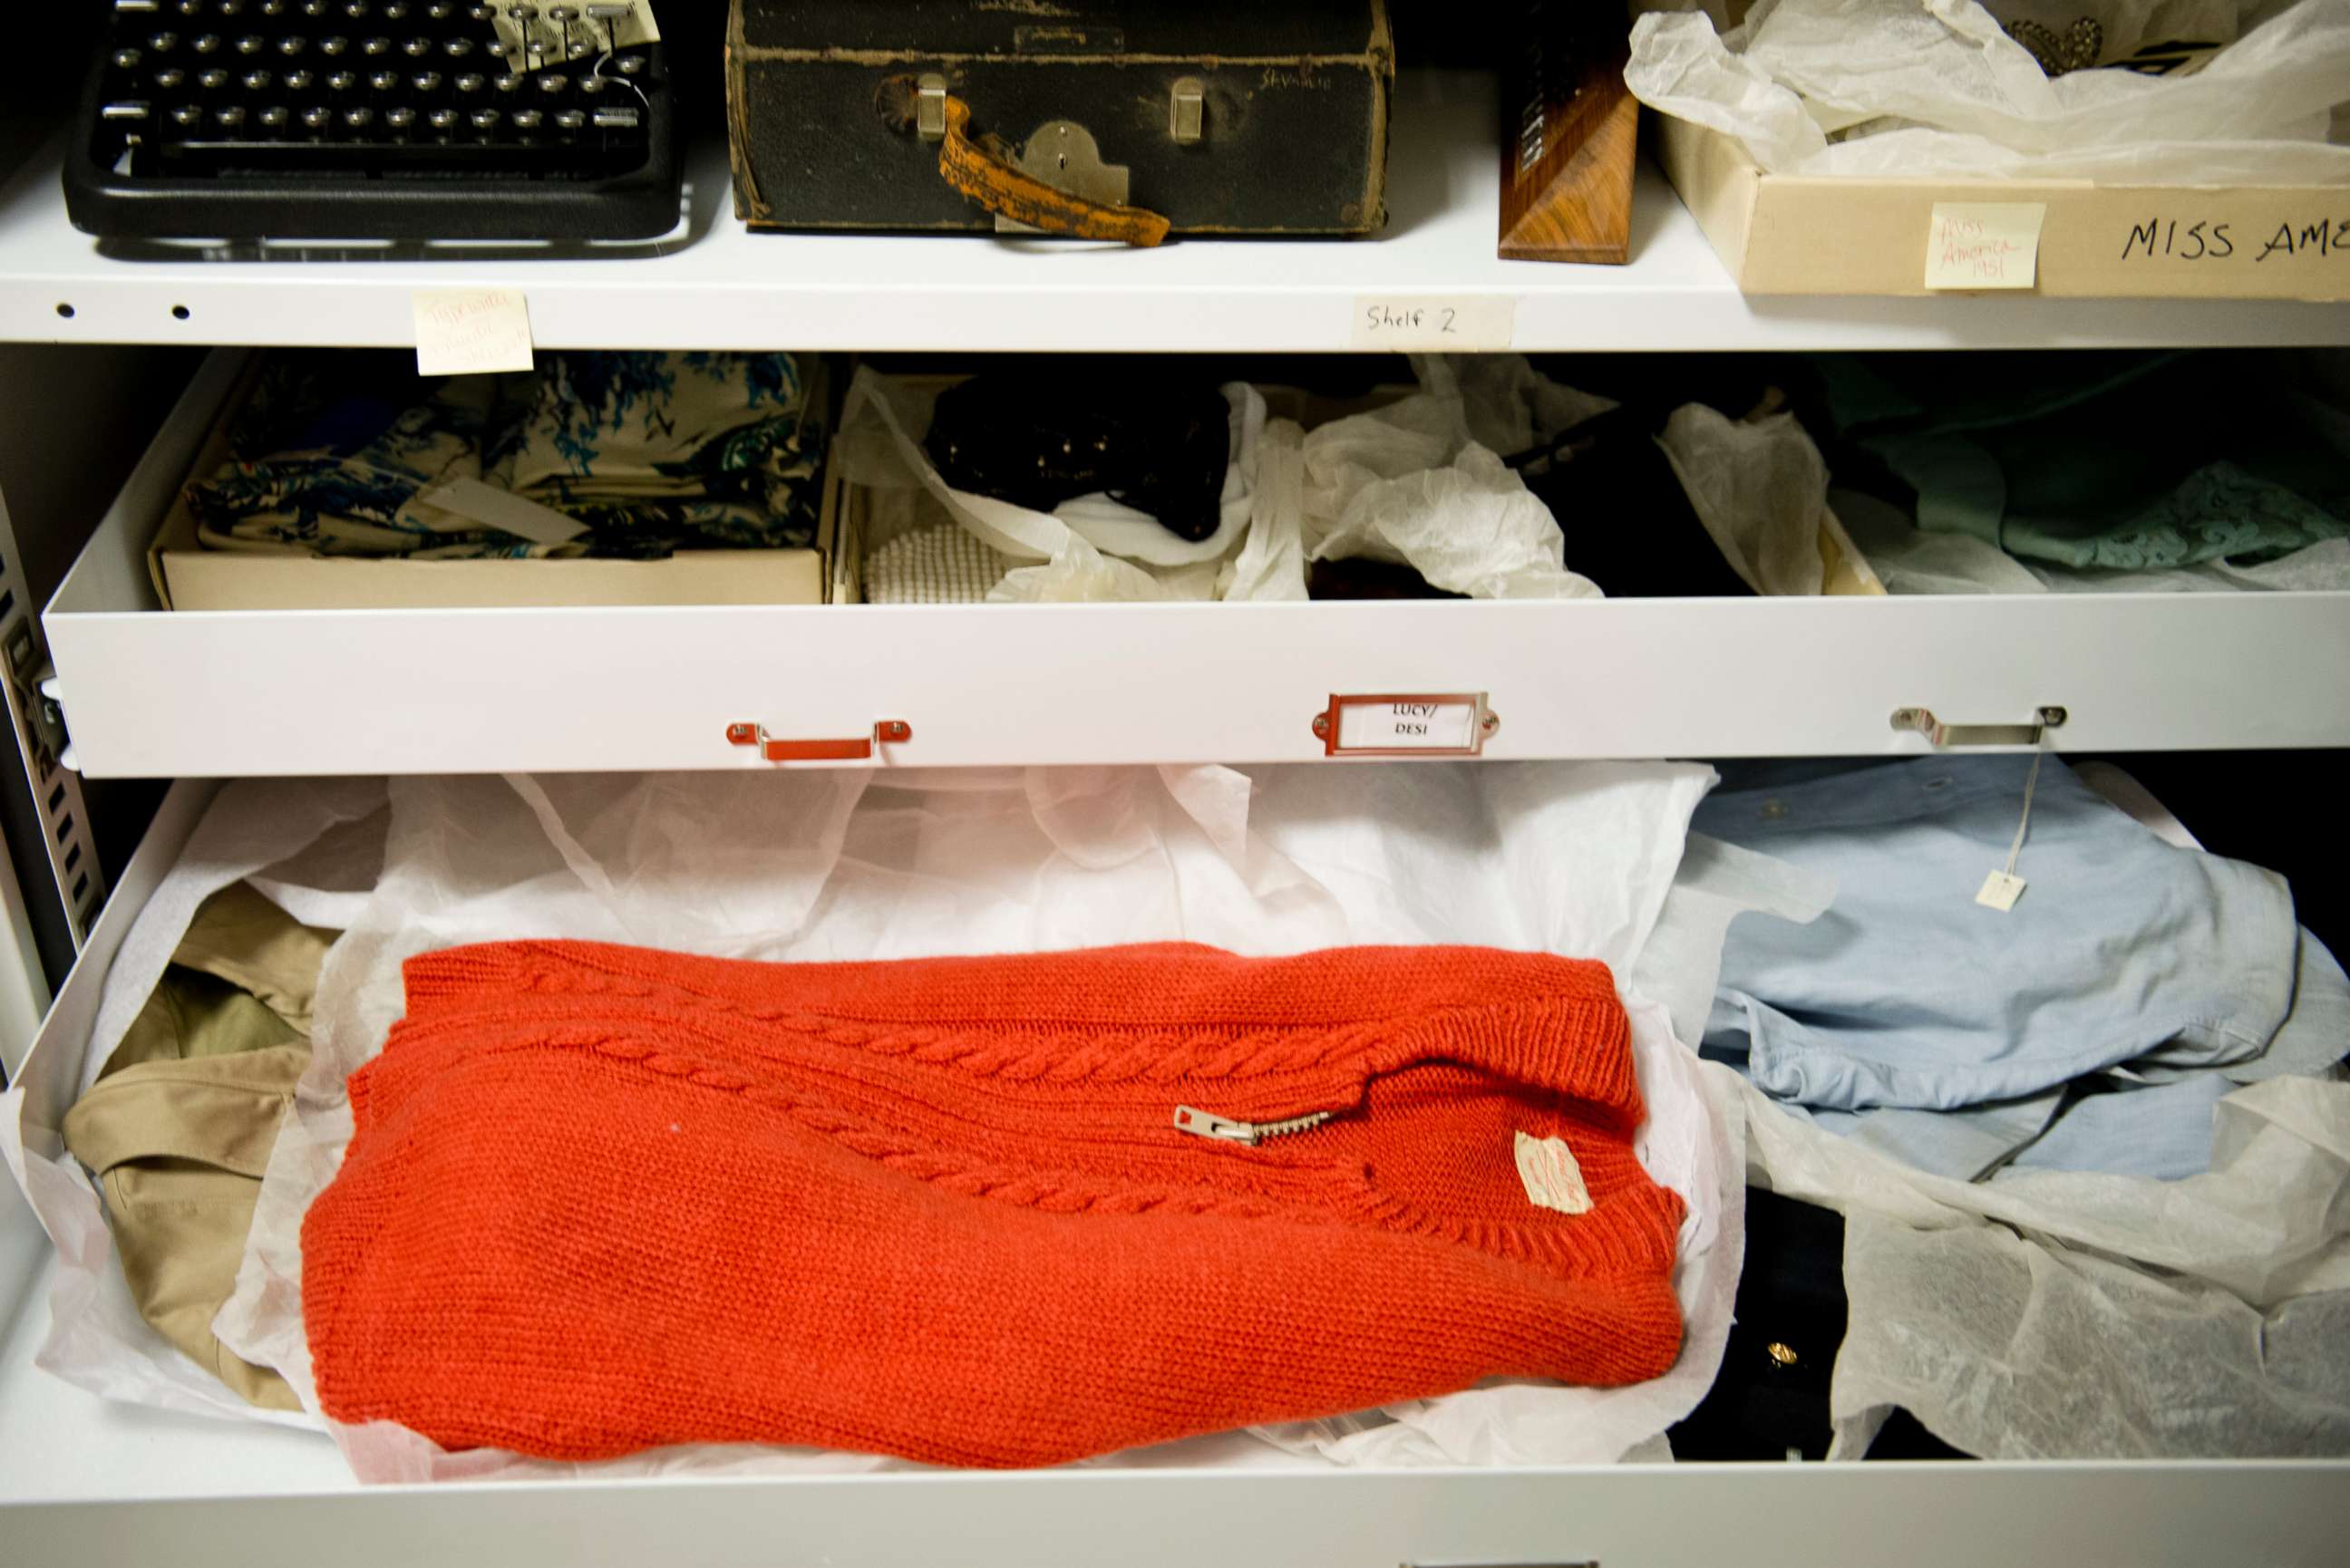 PHOTO: A sweater knitted by his mother and once belonging to Fred Rogers, star of PBS show 'Mister Rogers' Neighborhood', is seen among other items in the vaults at the Smithsonian's American History Museum July 27, 2012 in Washington, DC. 